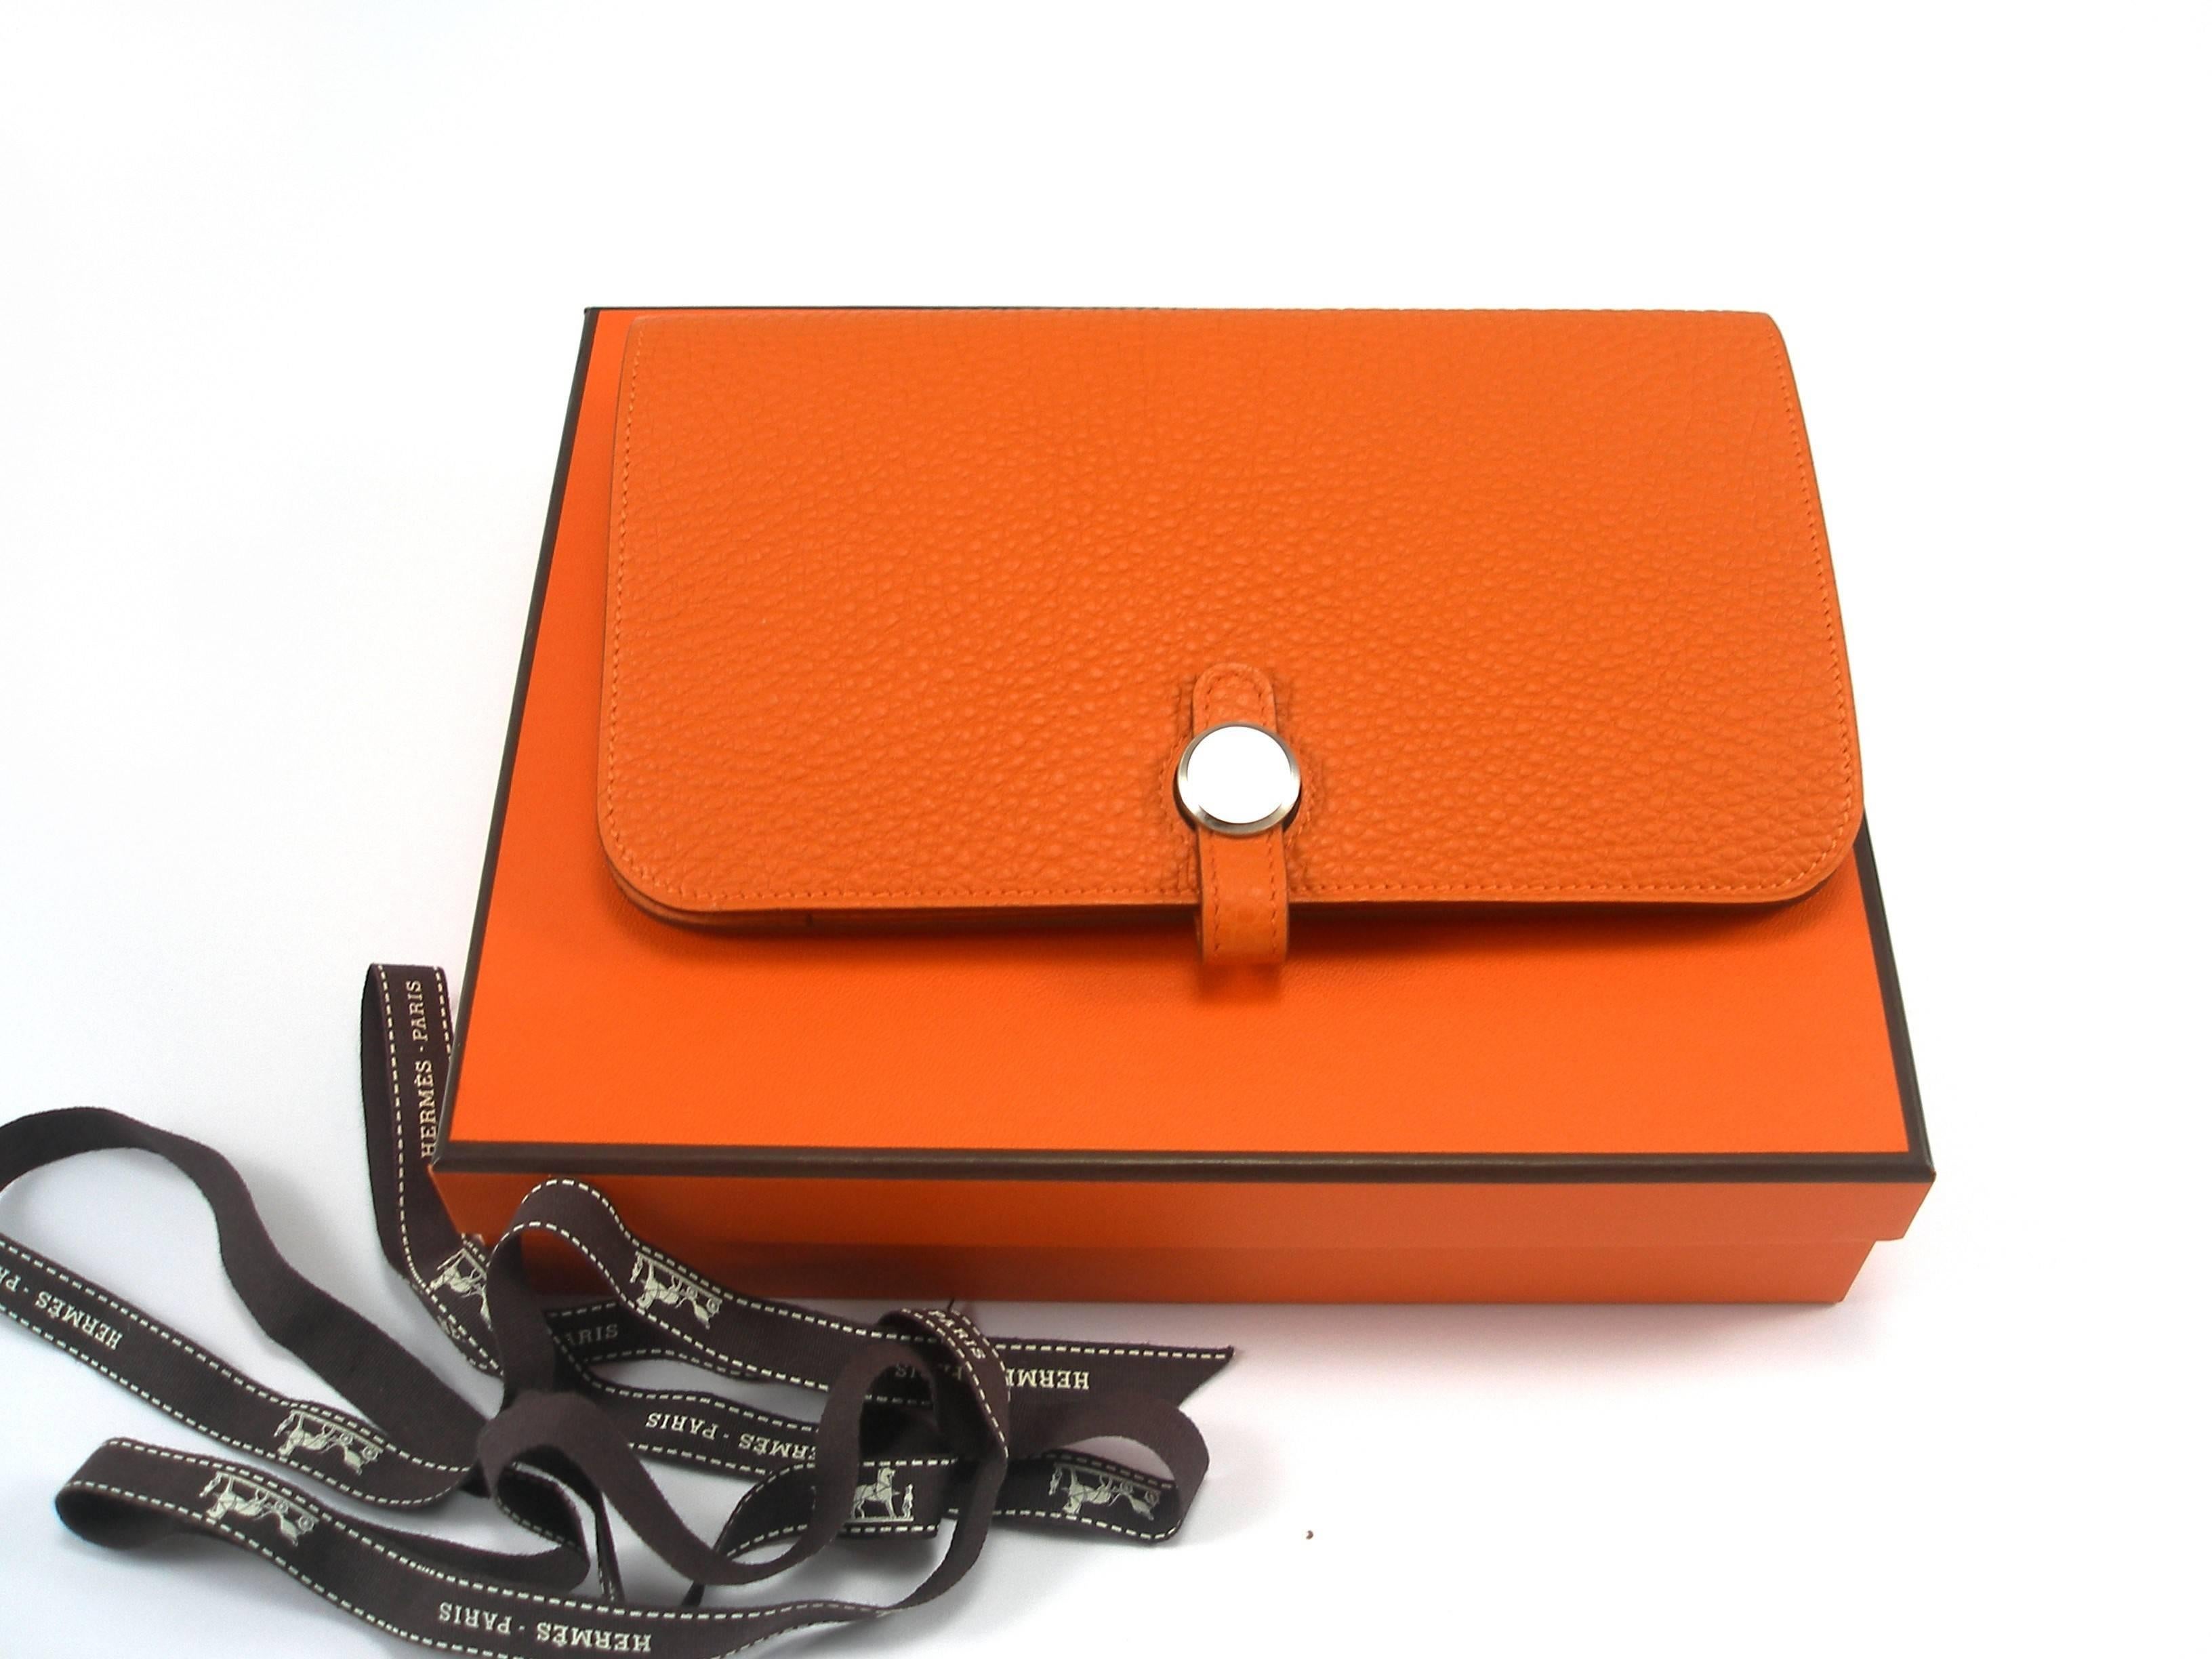 Hermès Dogon wallet Combine
COLOR IS WONDERFULL 
Togo leather 
Couture Orange
Palladium hardware / protection plastic on hardware 
New condition 10/10
Never worn
Note for this purchase : its comes from Hermès private sales reserved to Hermès staff /